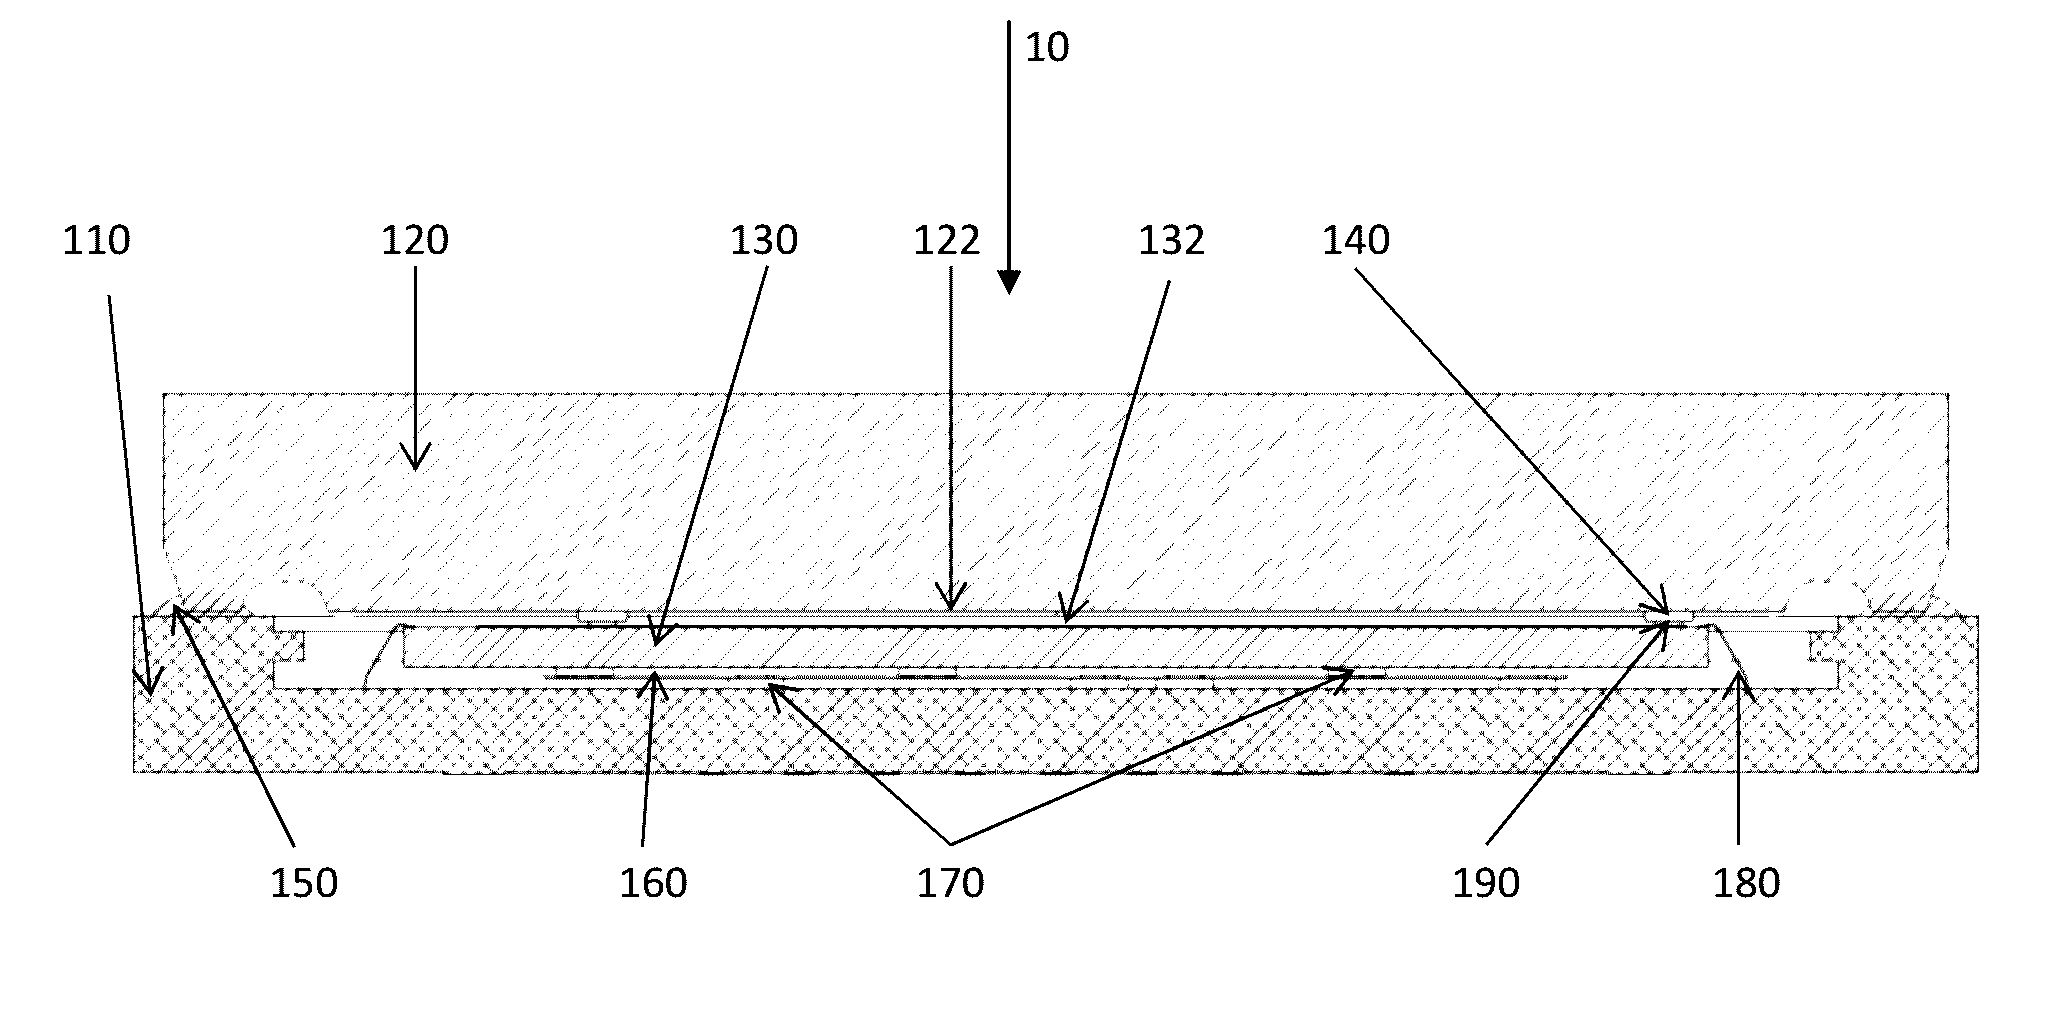 Image intensifier with indexed compliant anode assembly